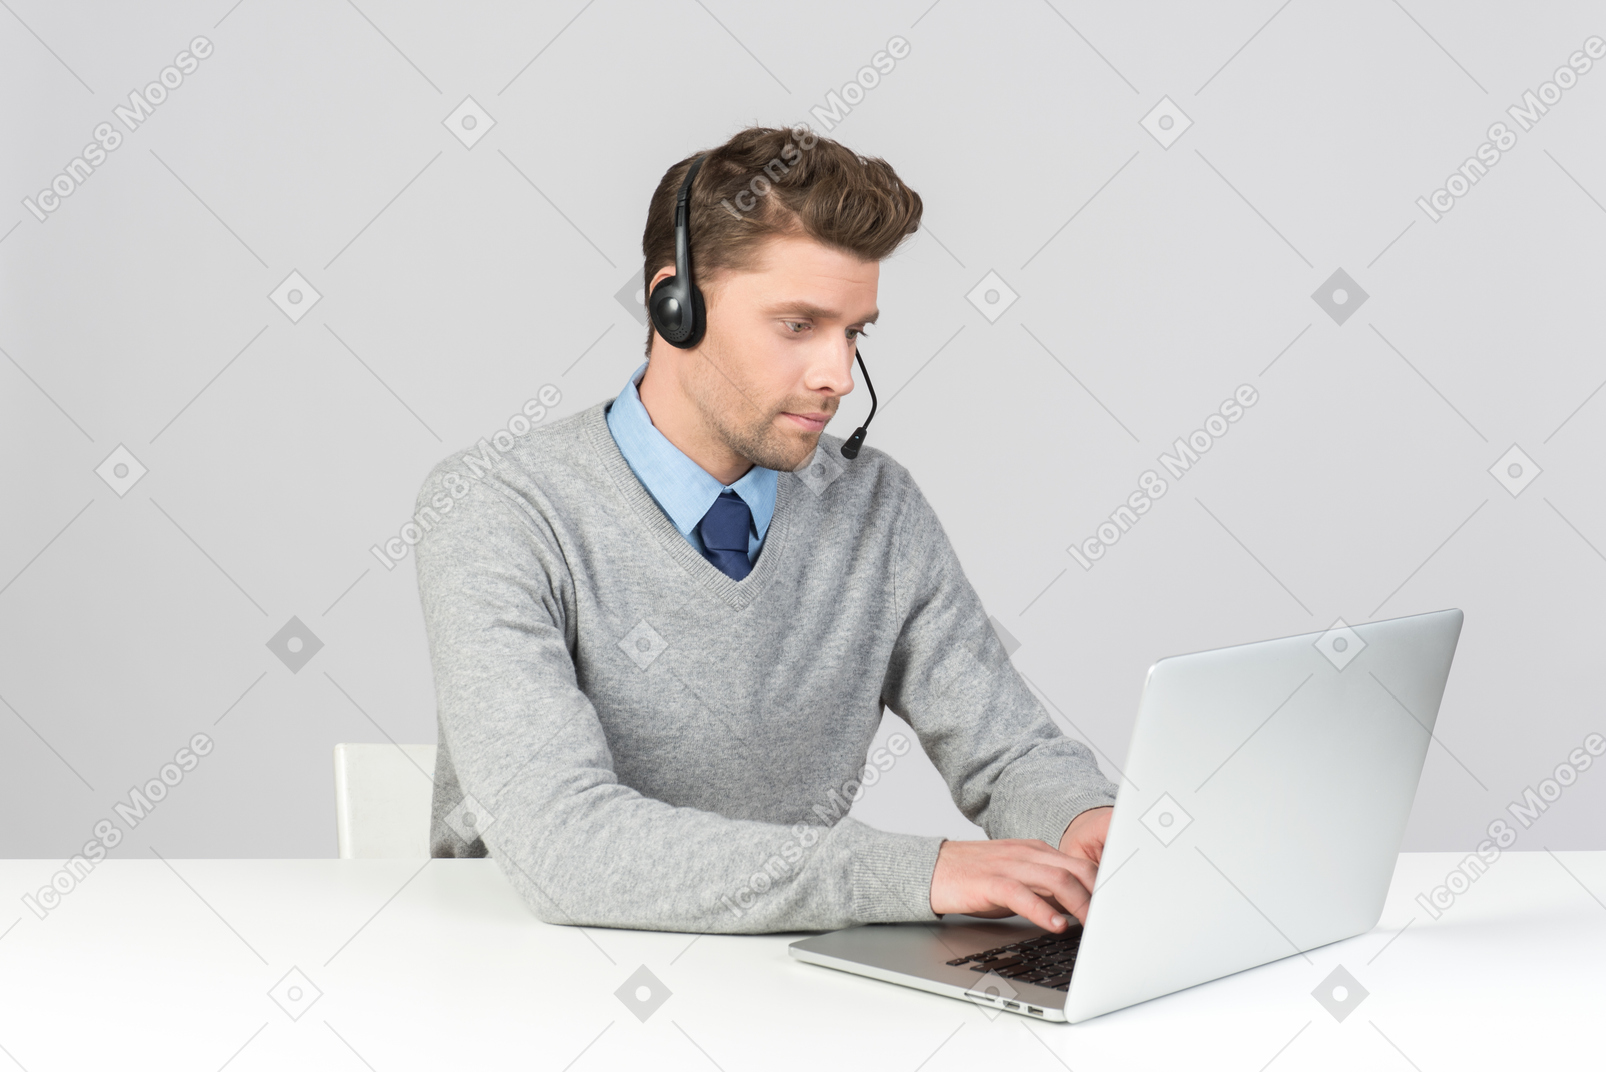 Call center agent working on computer